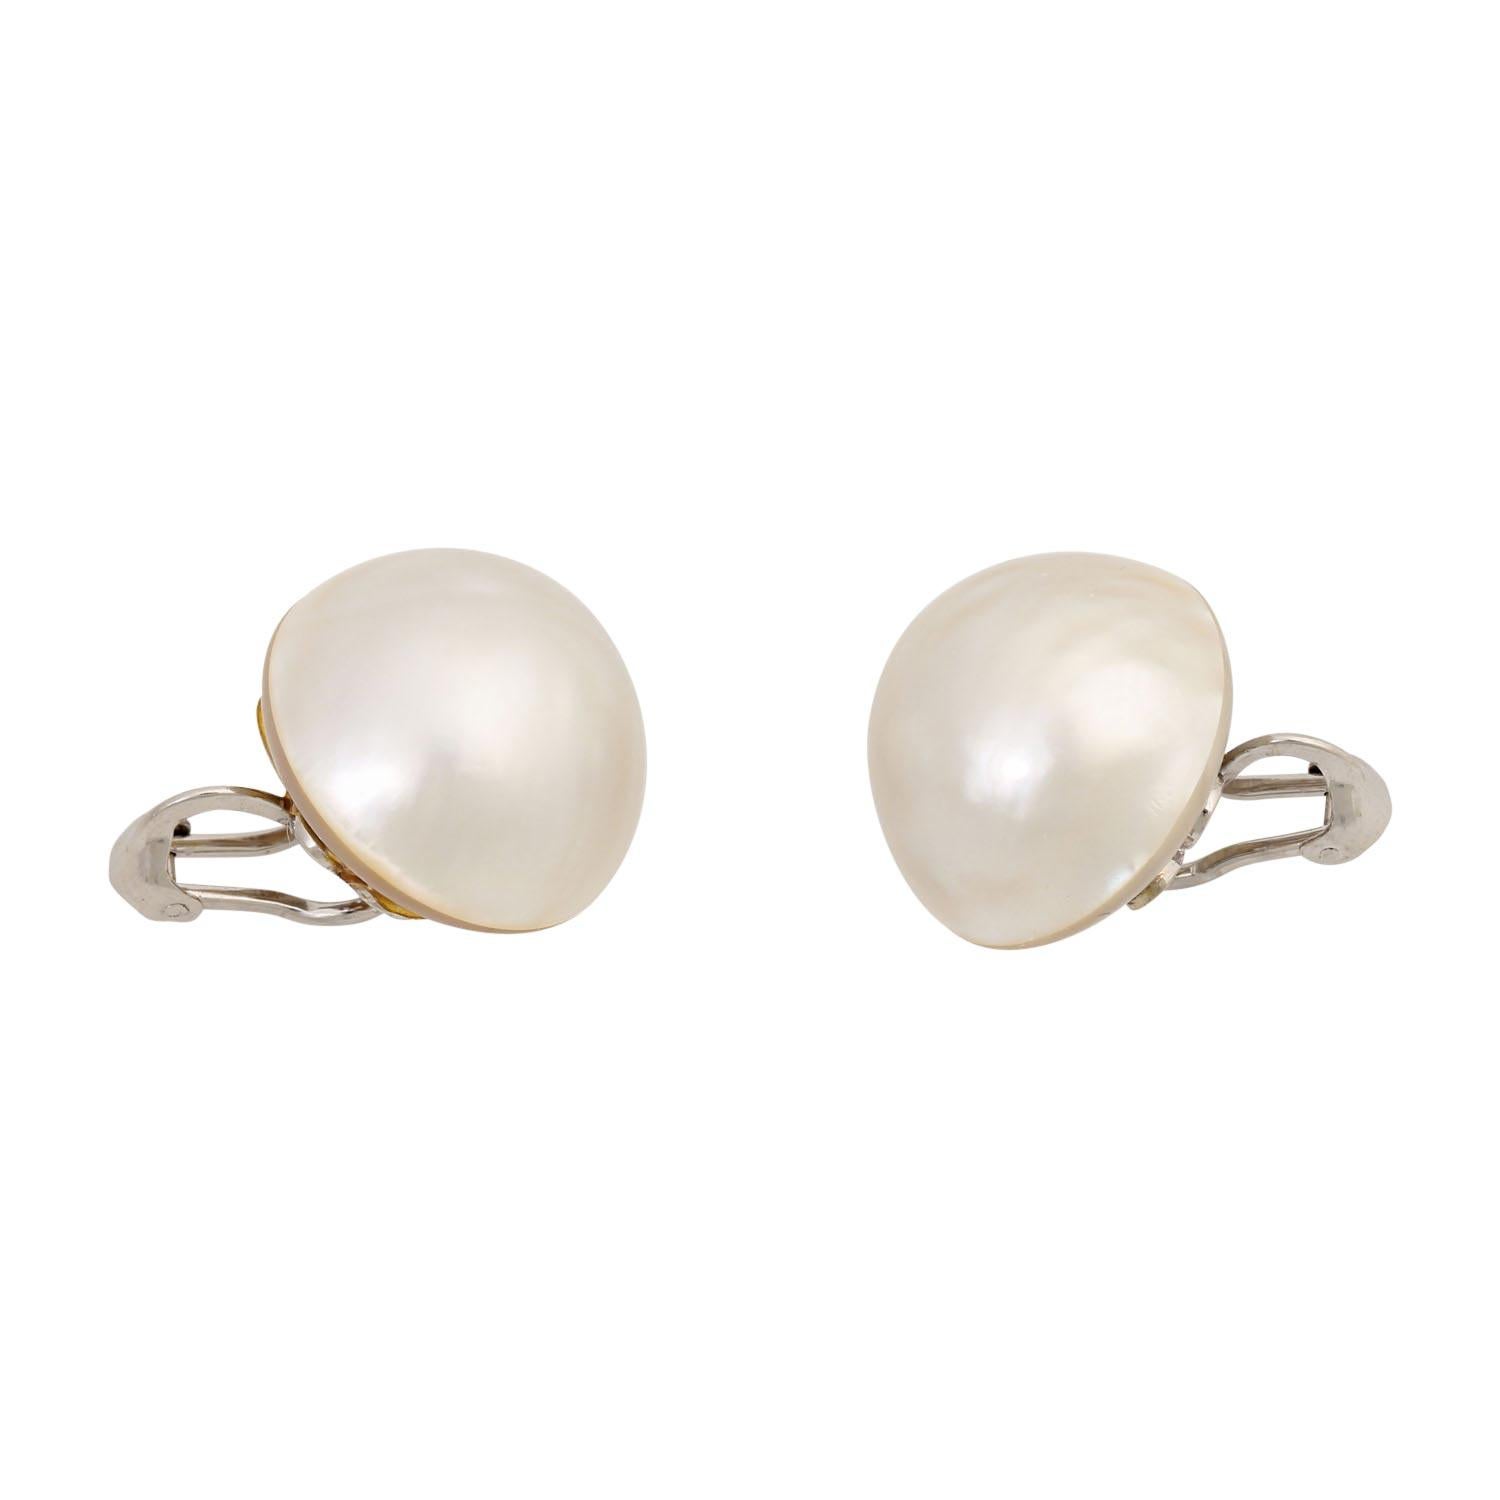 WG 14K, 15.1 g, 2nd half of the 20th century, signs of wear.

 Earclips with Mabe cultured pearls approx. 20 mm, 14K white gold, 15.1 g, 2nd half of 20th century, signs of wear.